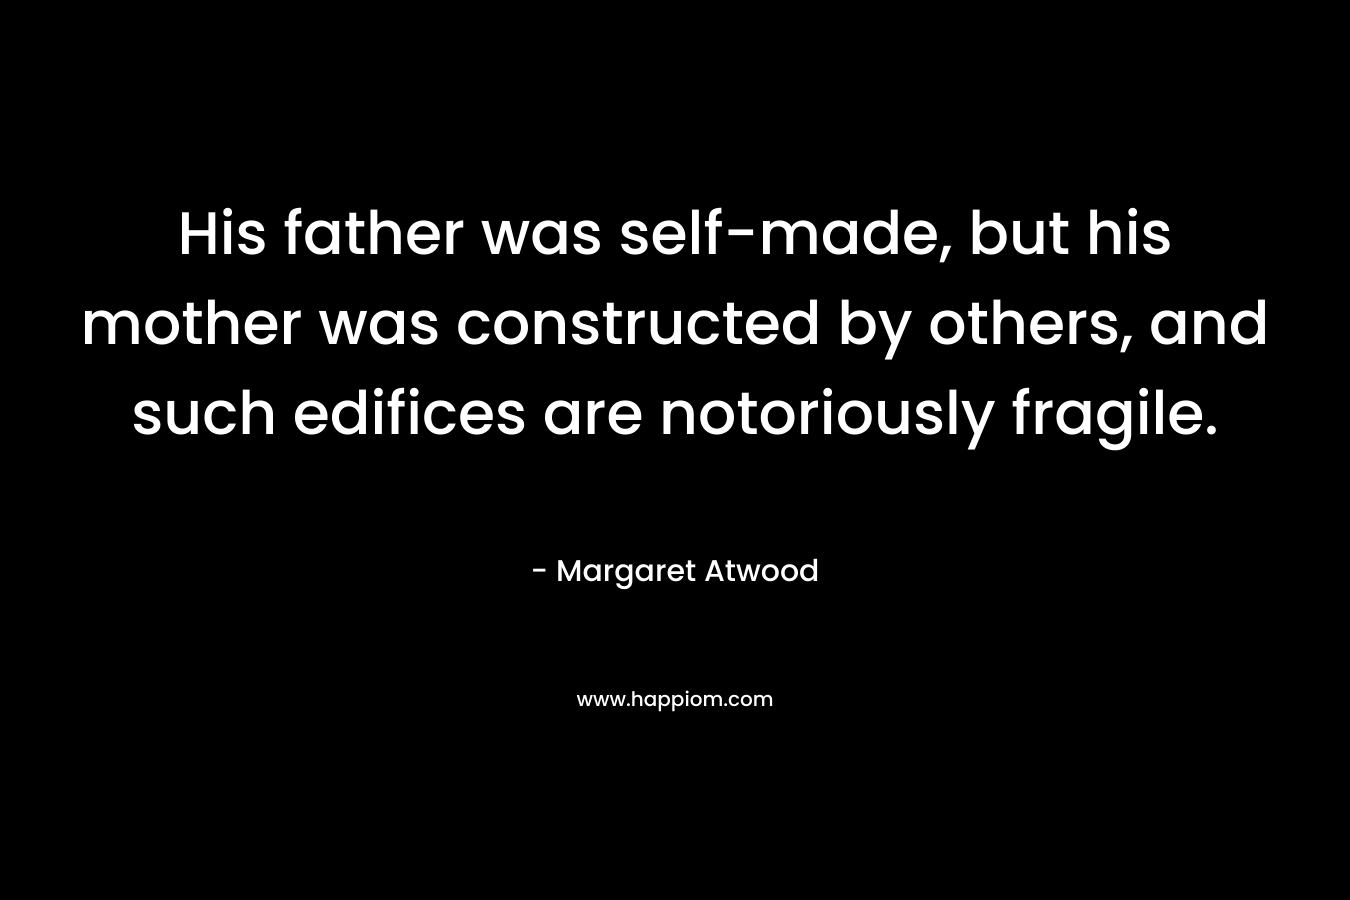 His father was self-made, but his mother was constructed by others, and such edifices are notoriously fragile. – Margaret Atwood